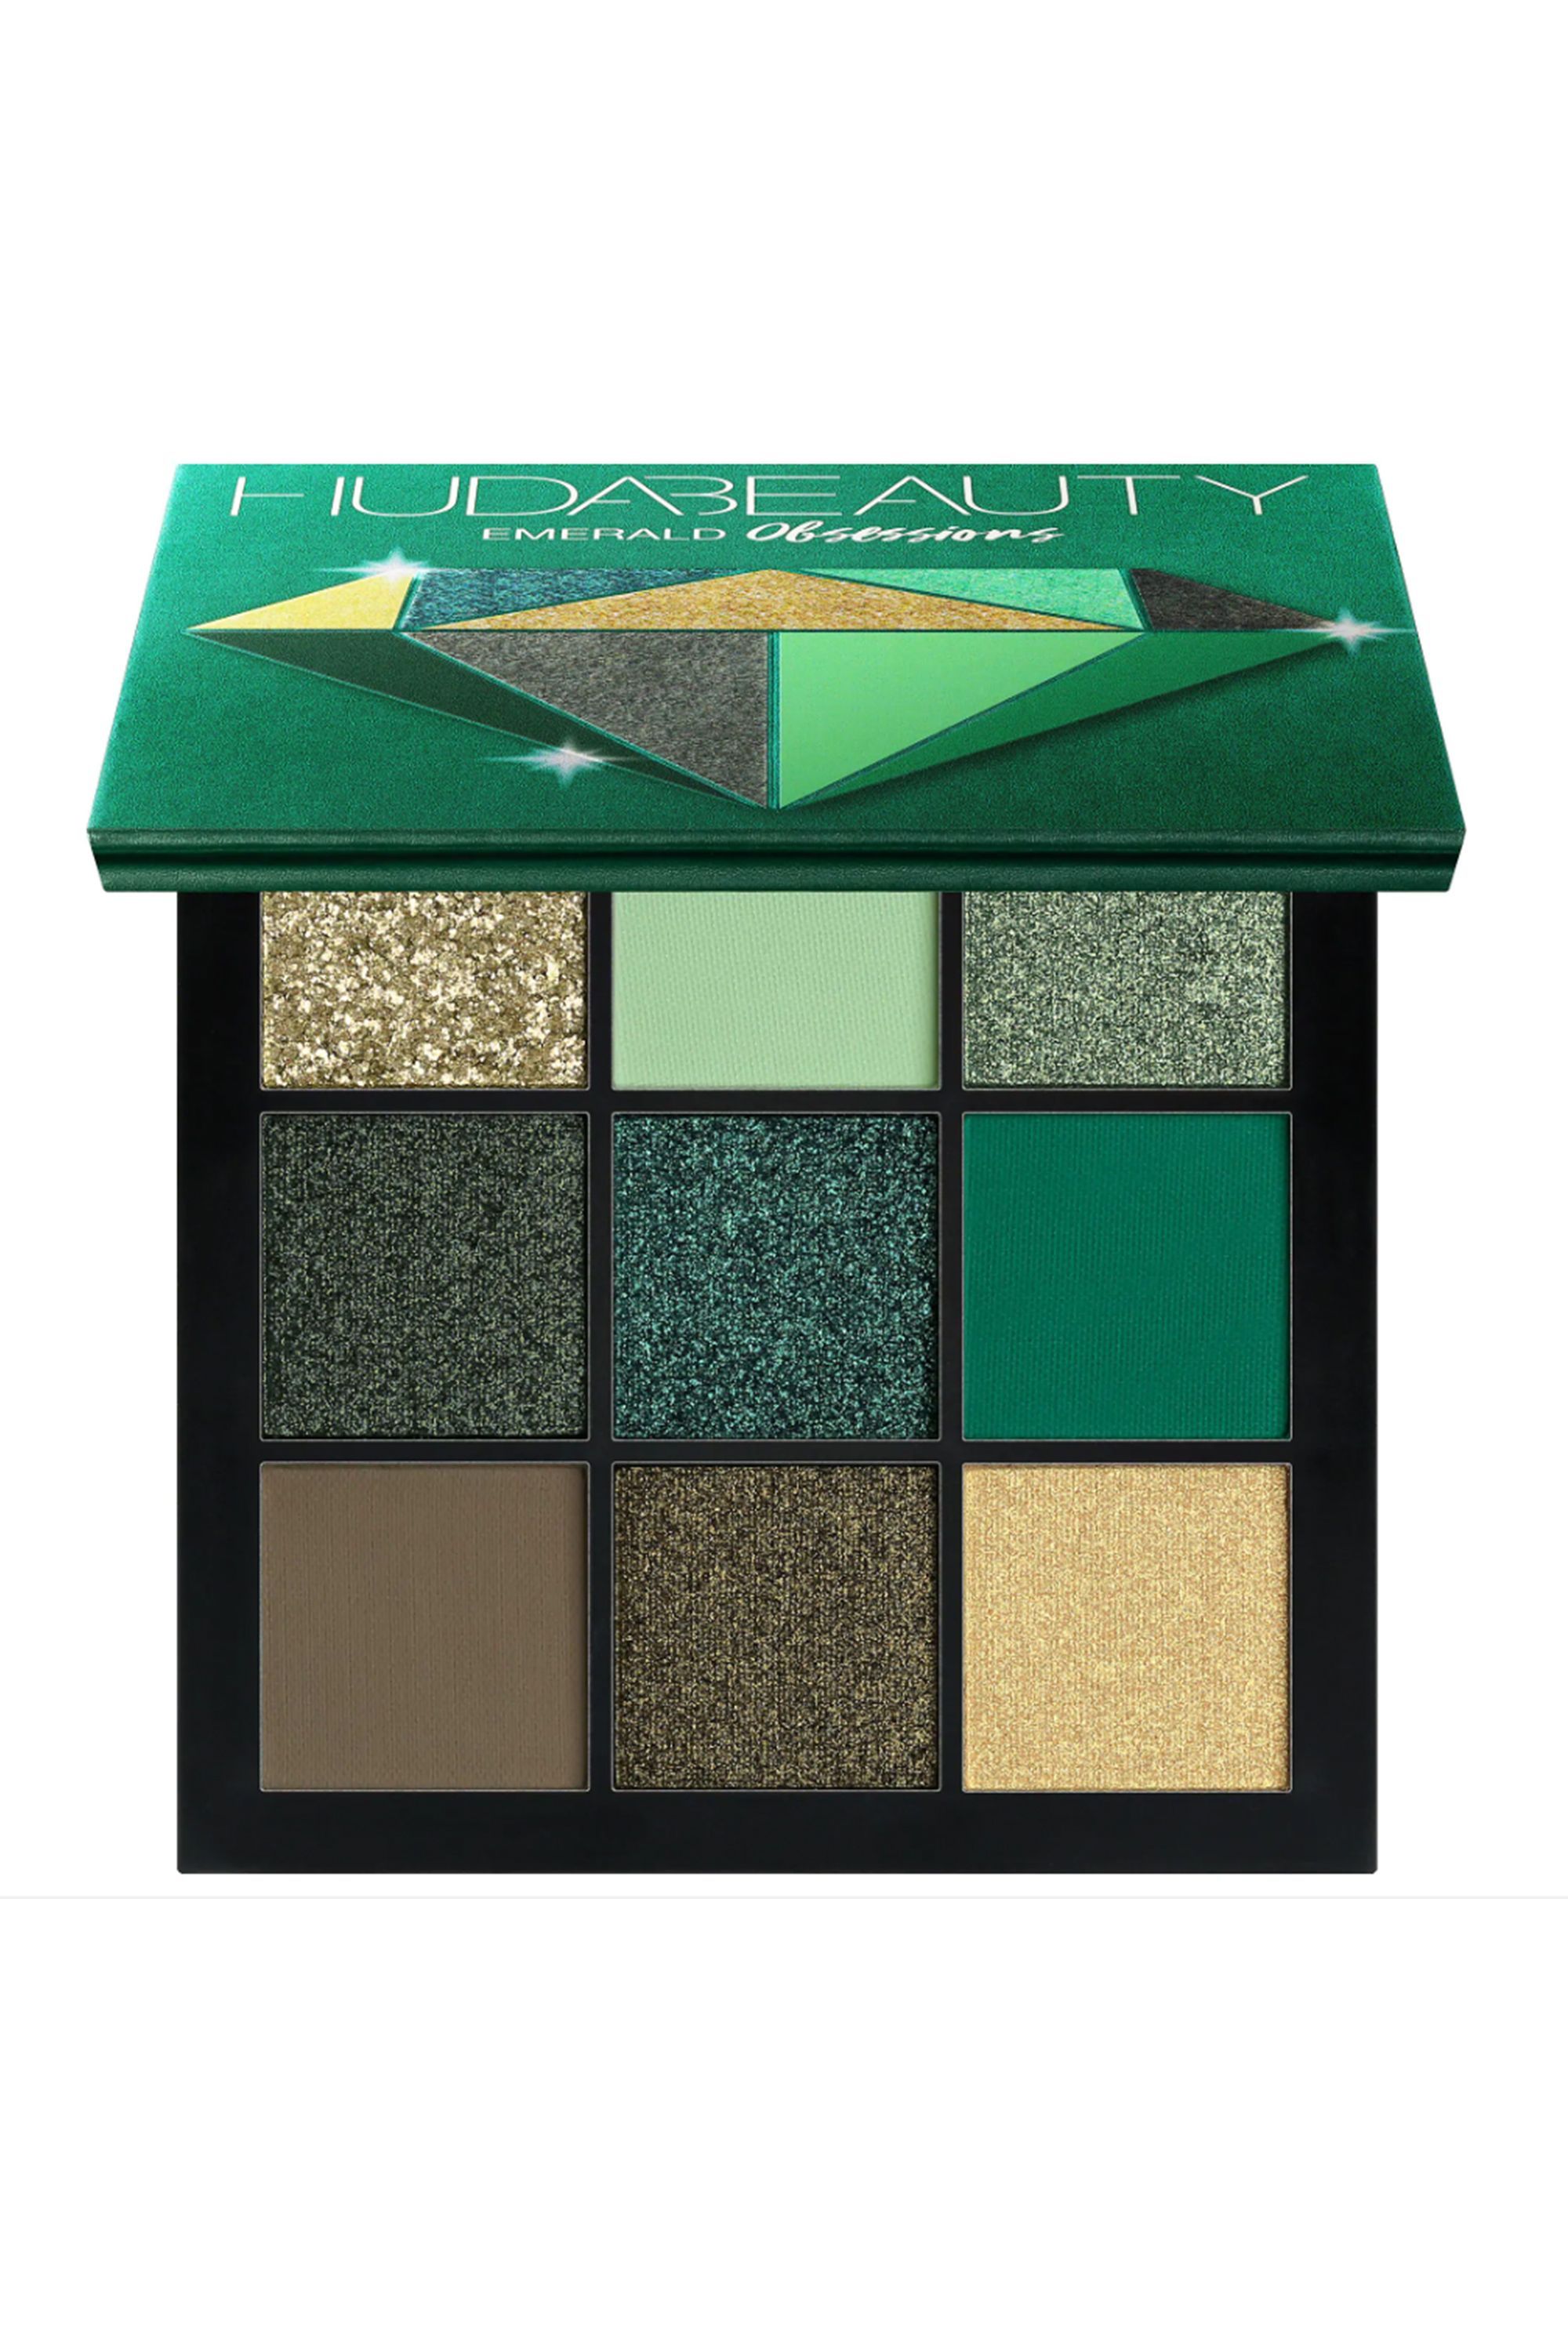 Obsessions Eyeshadow Palette in Emerald 